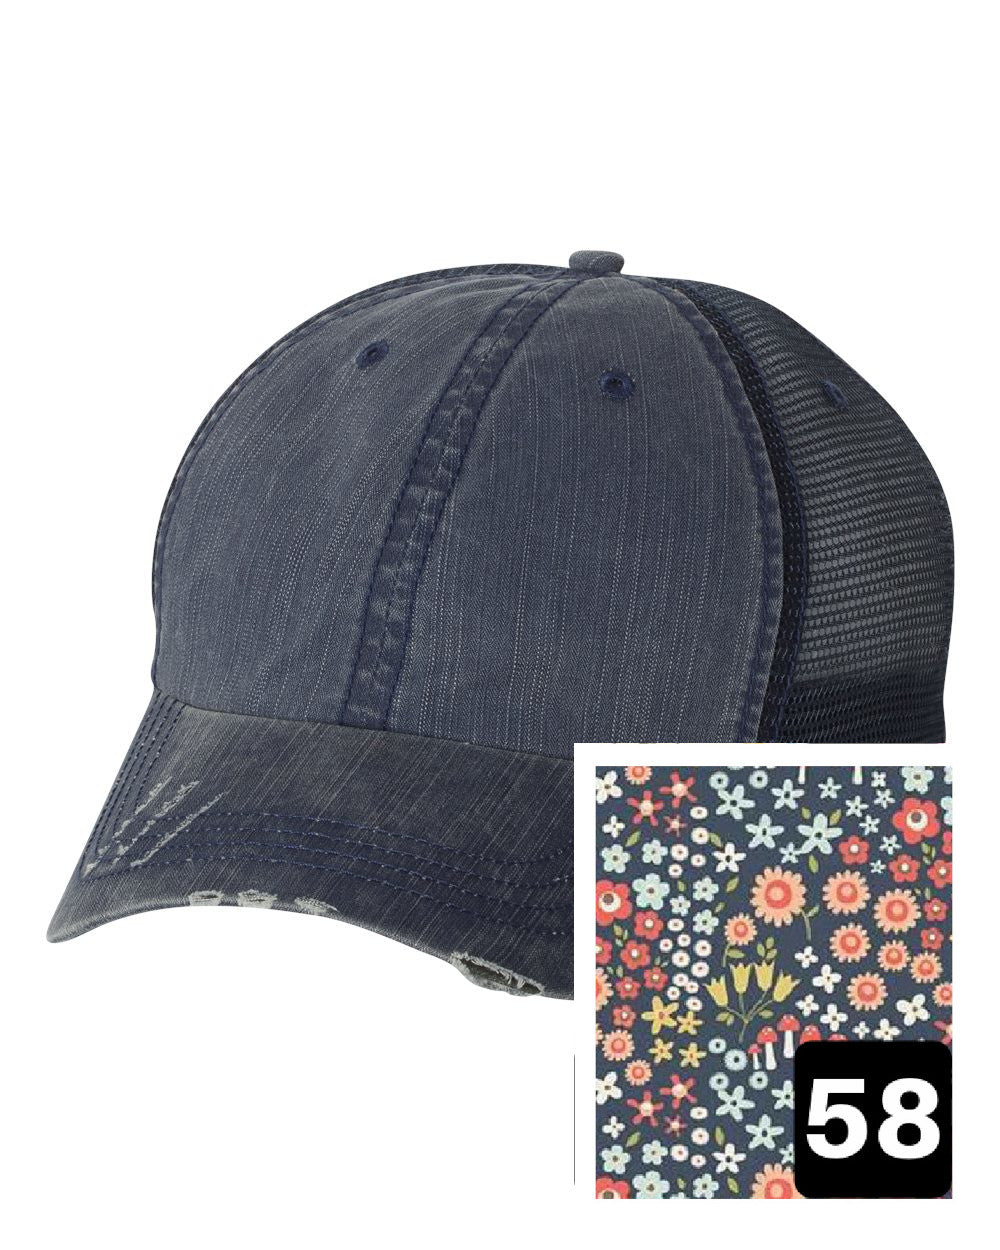 Michigan Hat | Navy Distressed Trucker Cap | Many Fabric Choices